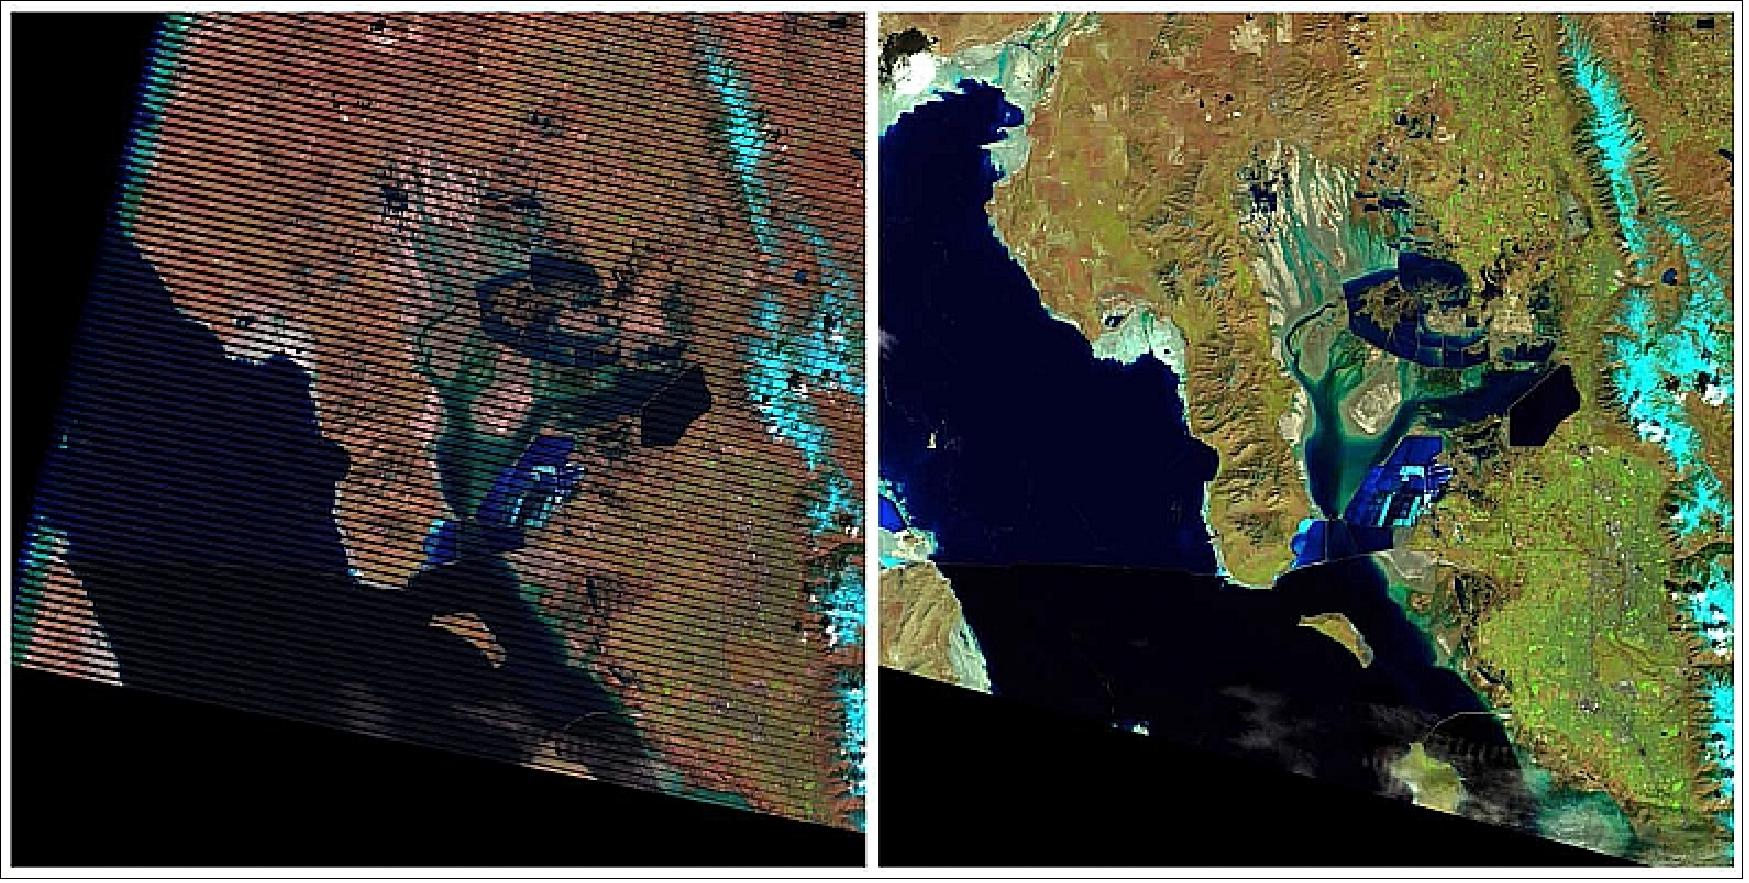 Figure 44: These images show a portion of the Great Salt Lake, Utah as seen by LS-7 (left) and LS-8 (LDCM) satellites (right); both images were acquired on March 29, 2013 (image credit: USGS, Ref. 51)